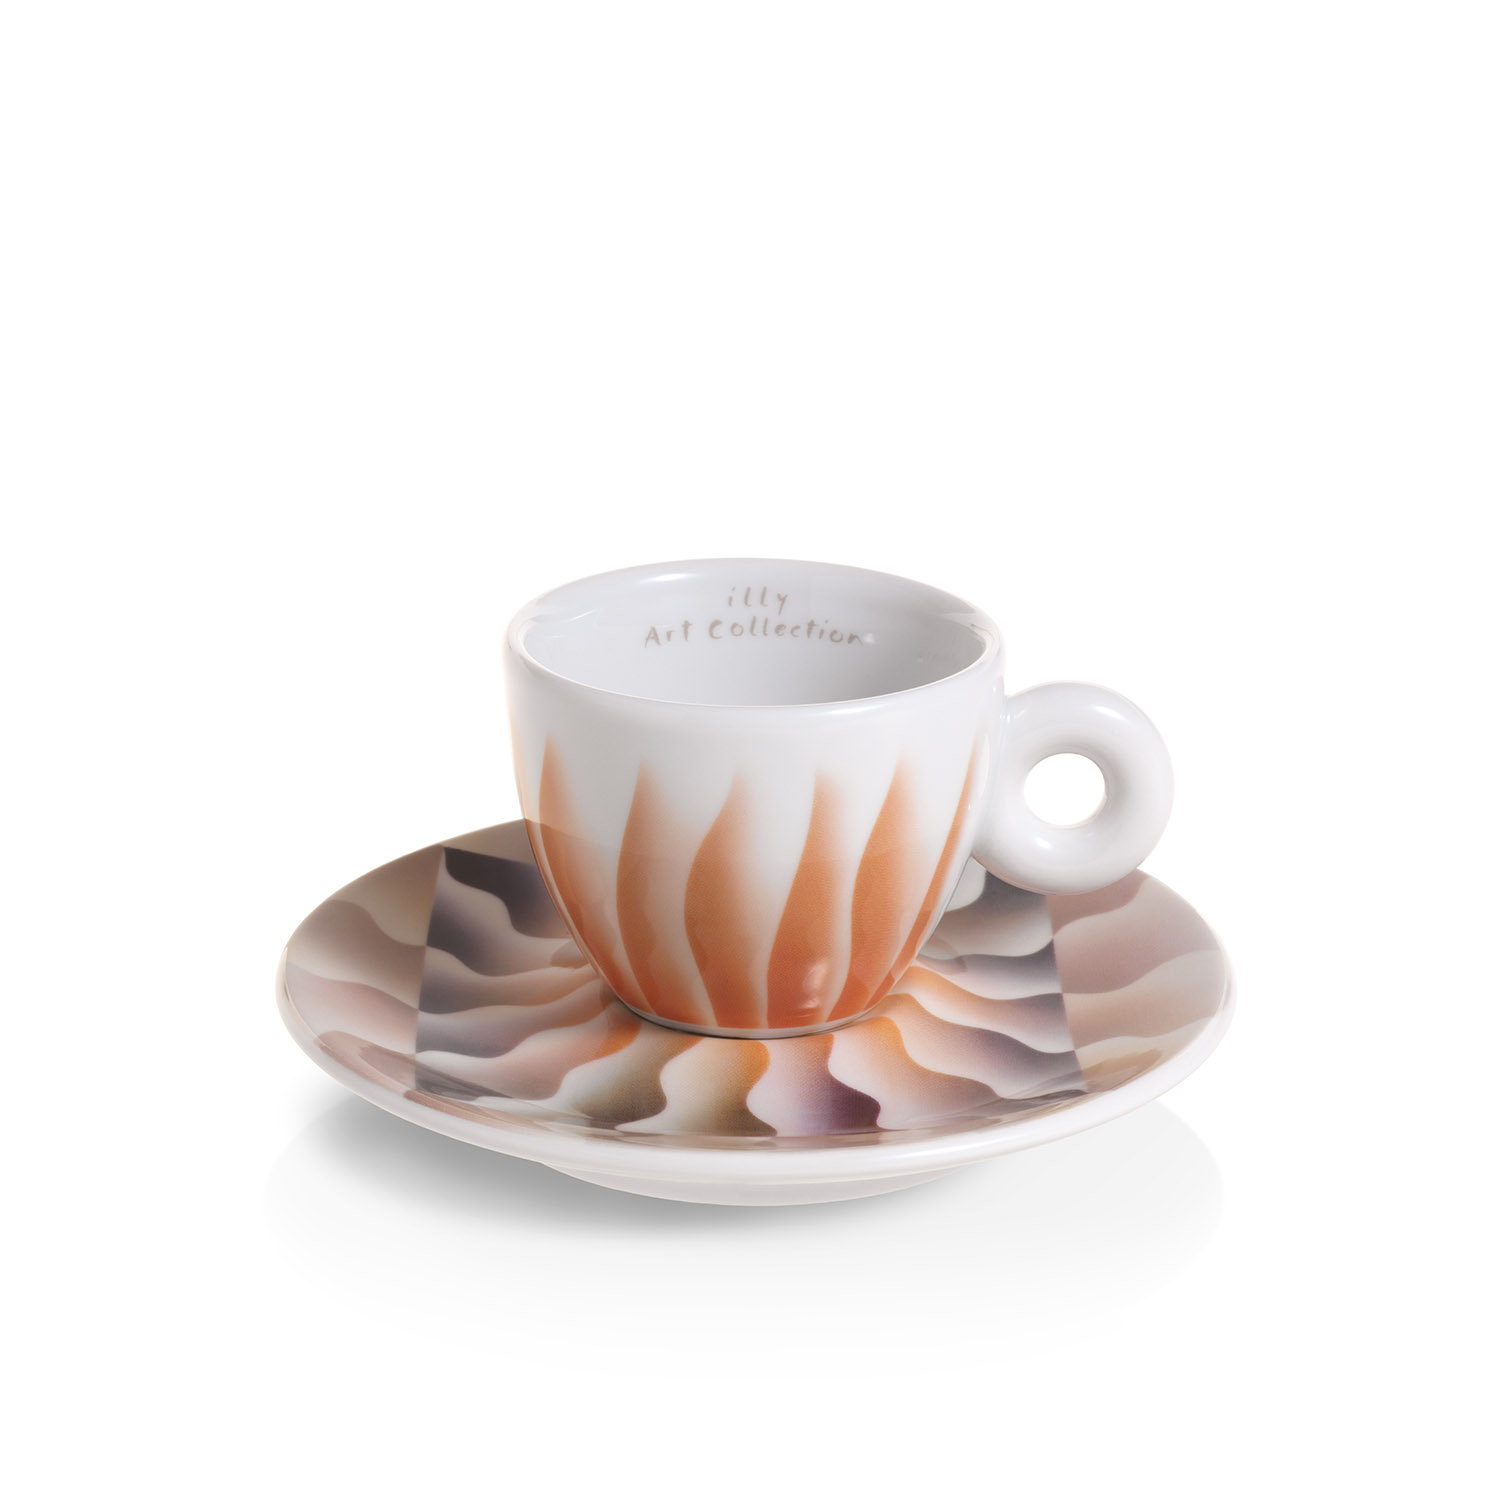 Set of 4 espresso cups - the Judy Chicago illy Art Collection